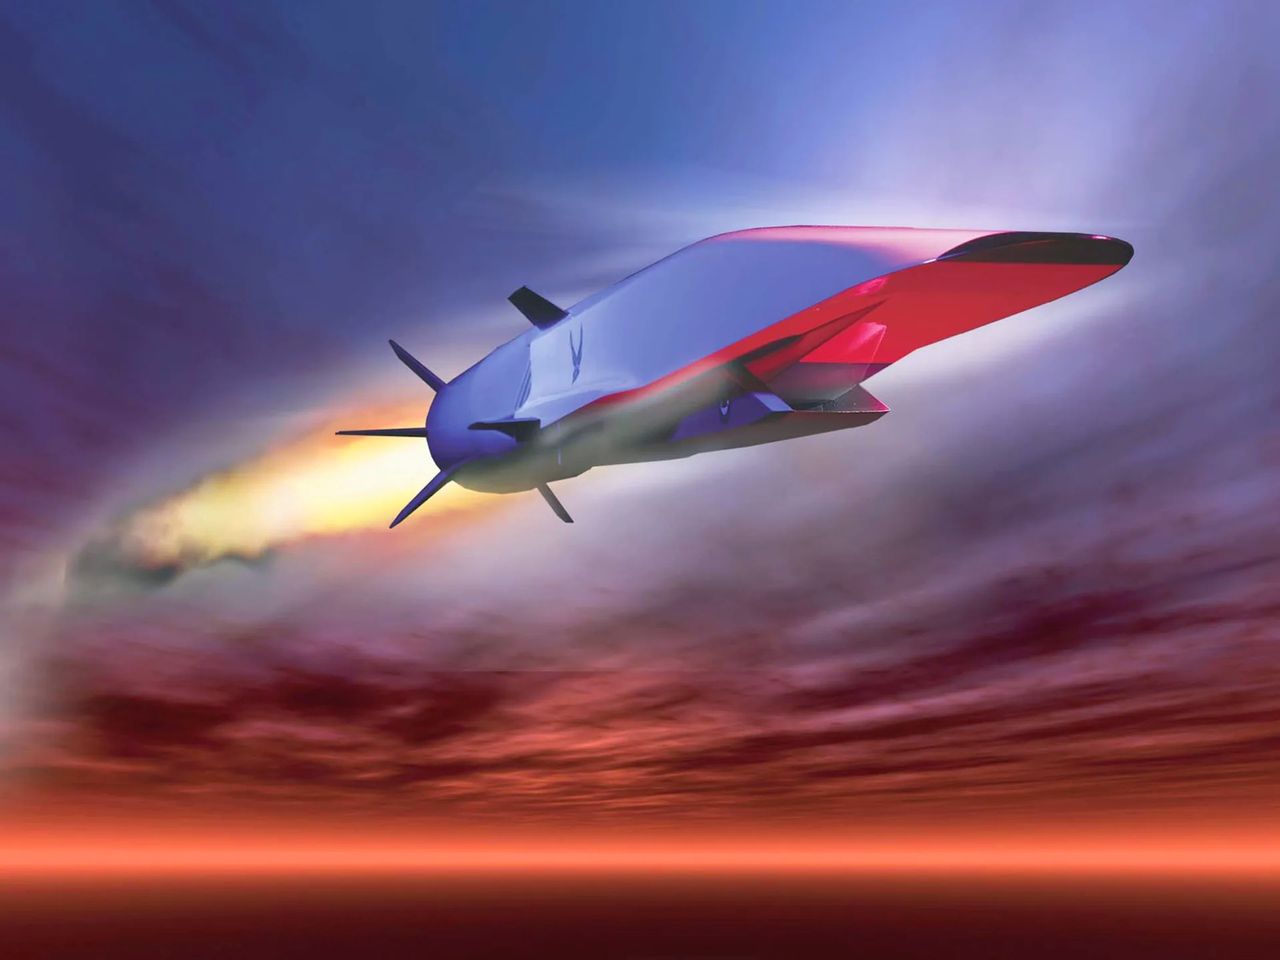 GE Aerospace tests groundbreaking jet engine, DMRJ: An innovation to propel hypersonic vehicles at 4,000 mph